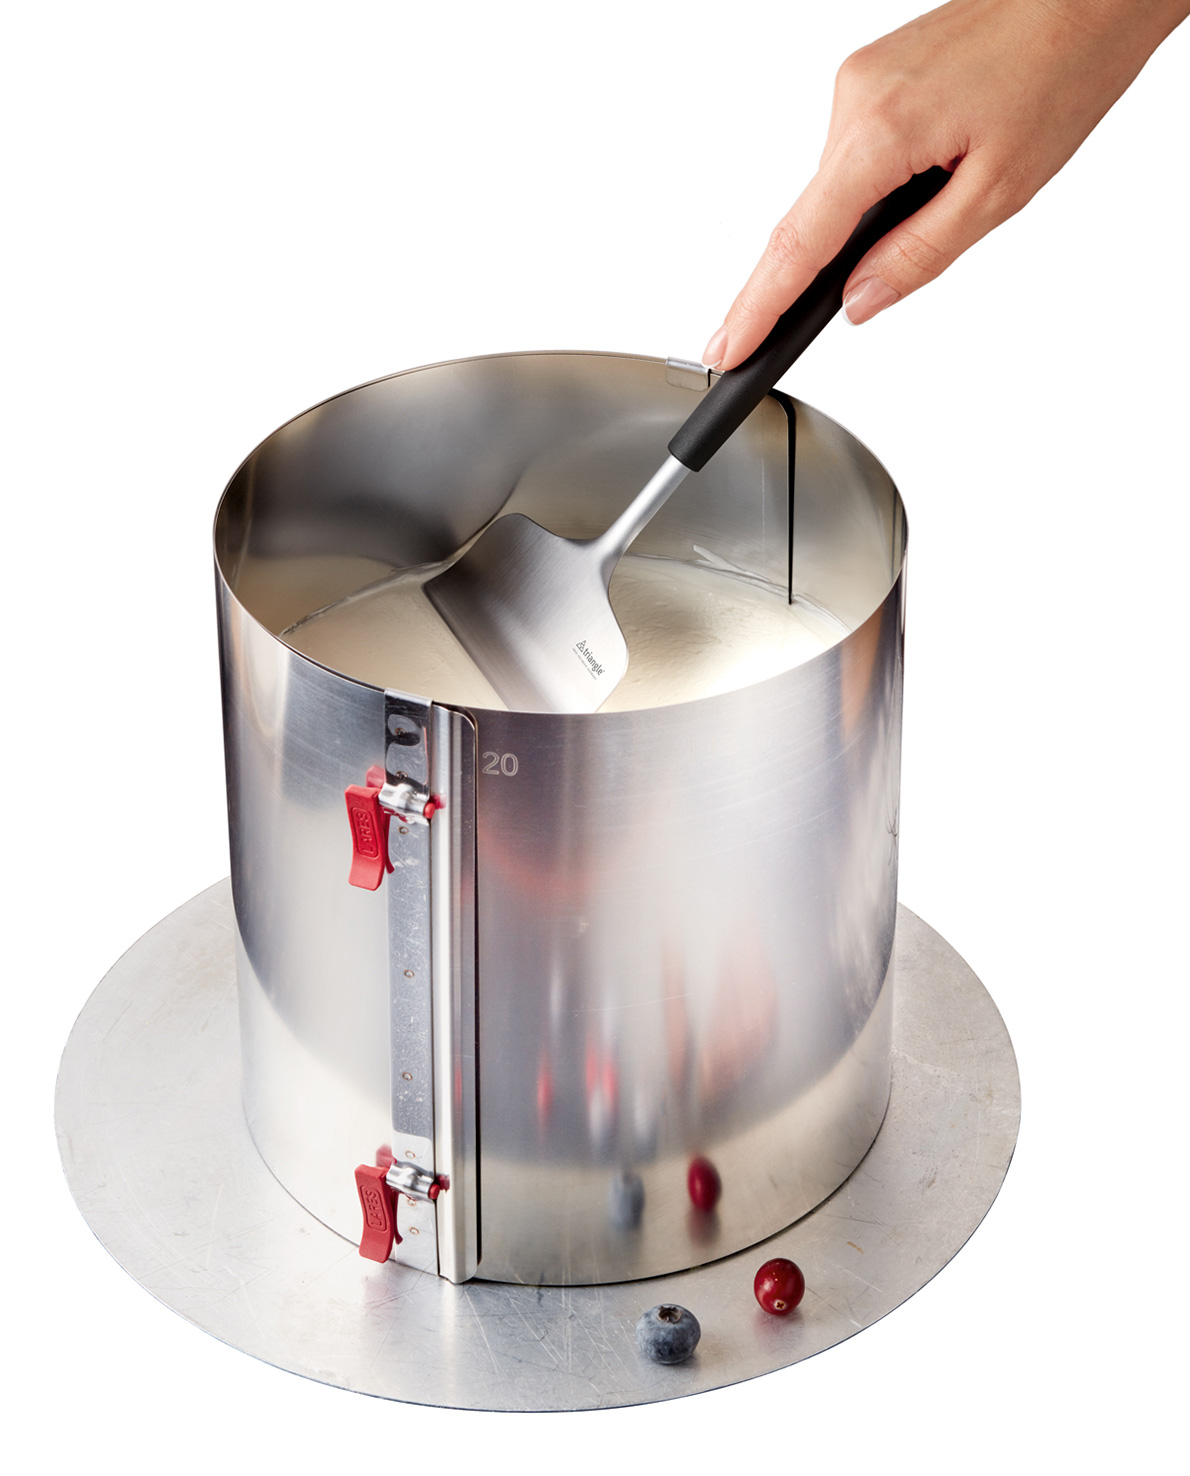 Cream spreader - Perfectly smooth surfaces even in large cake